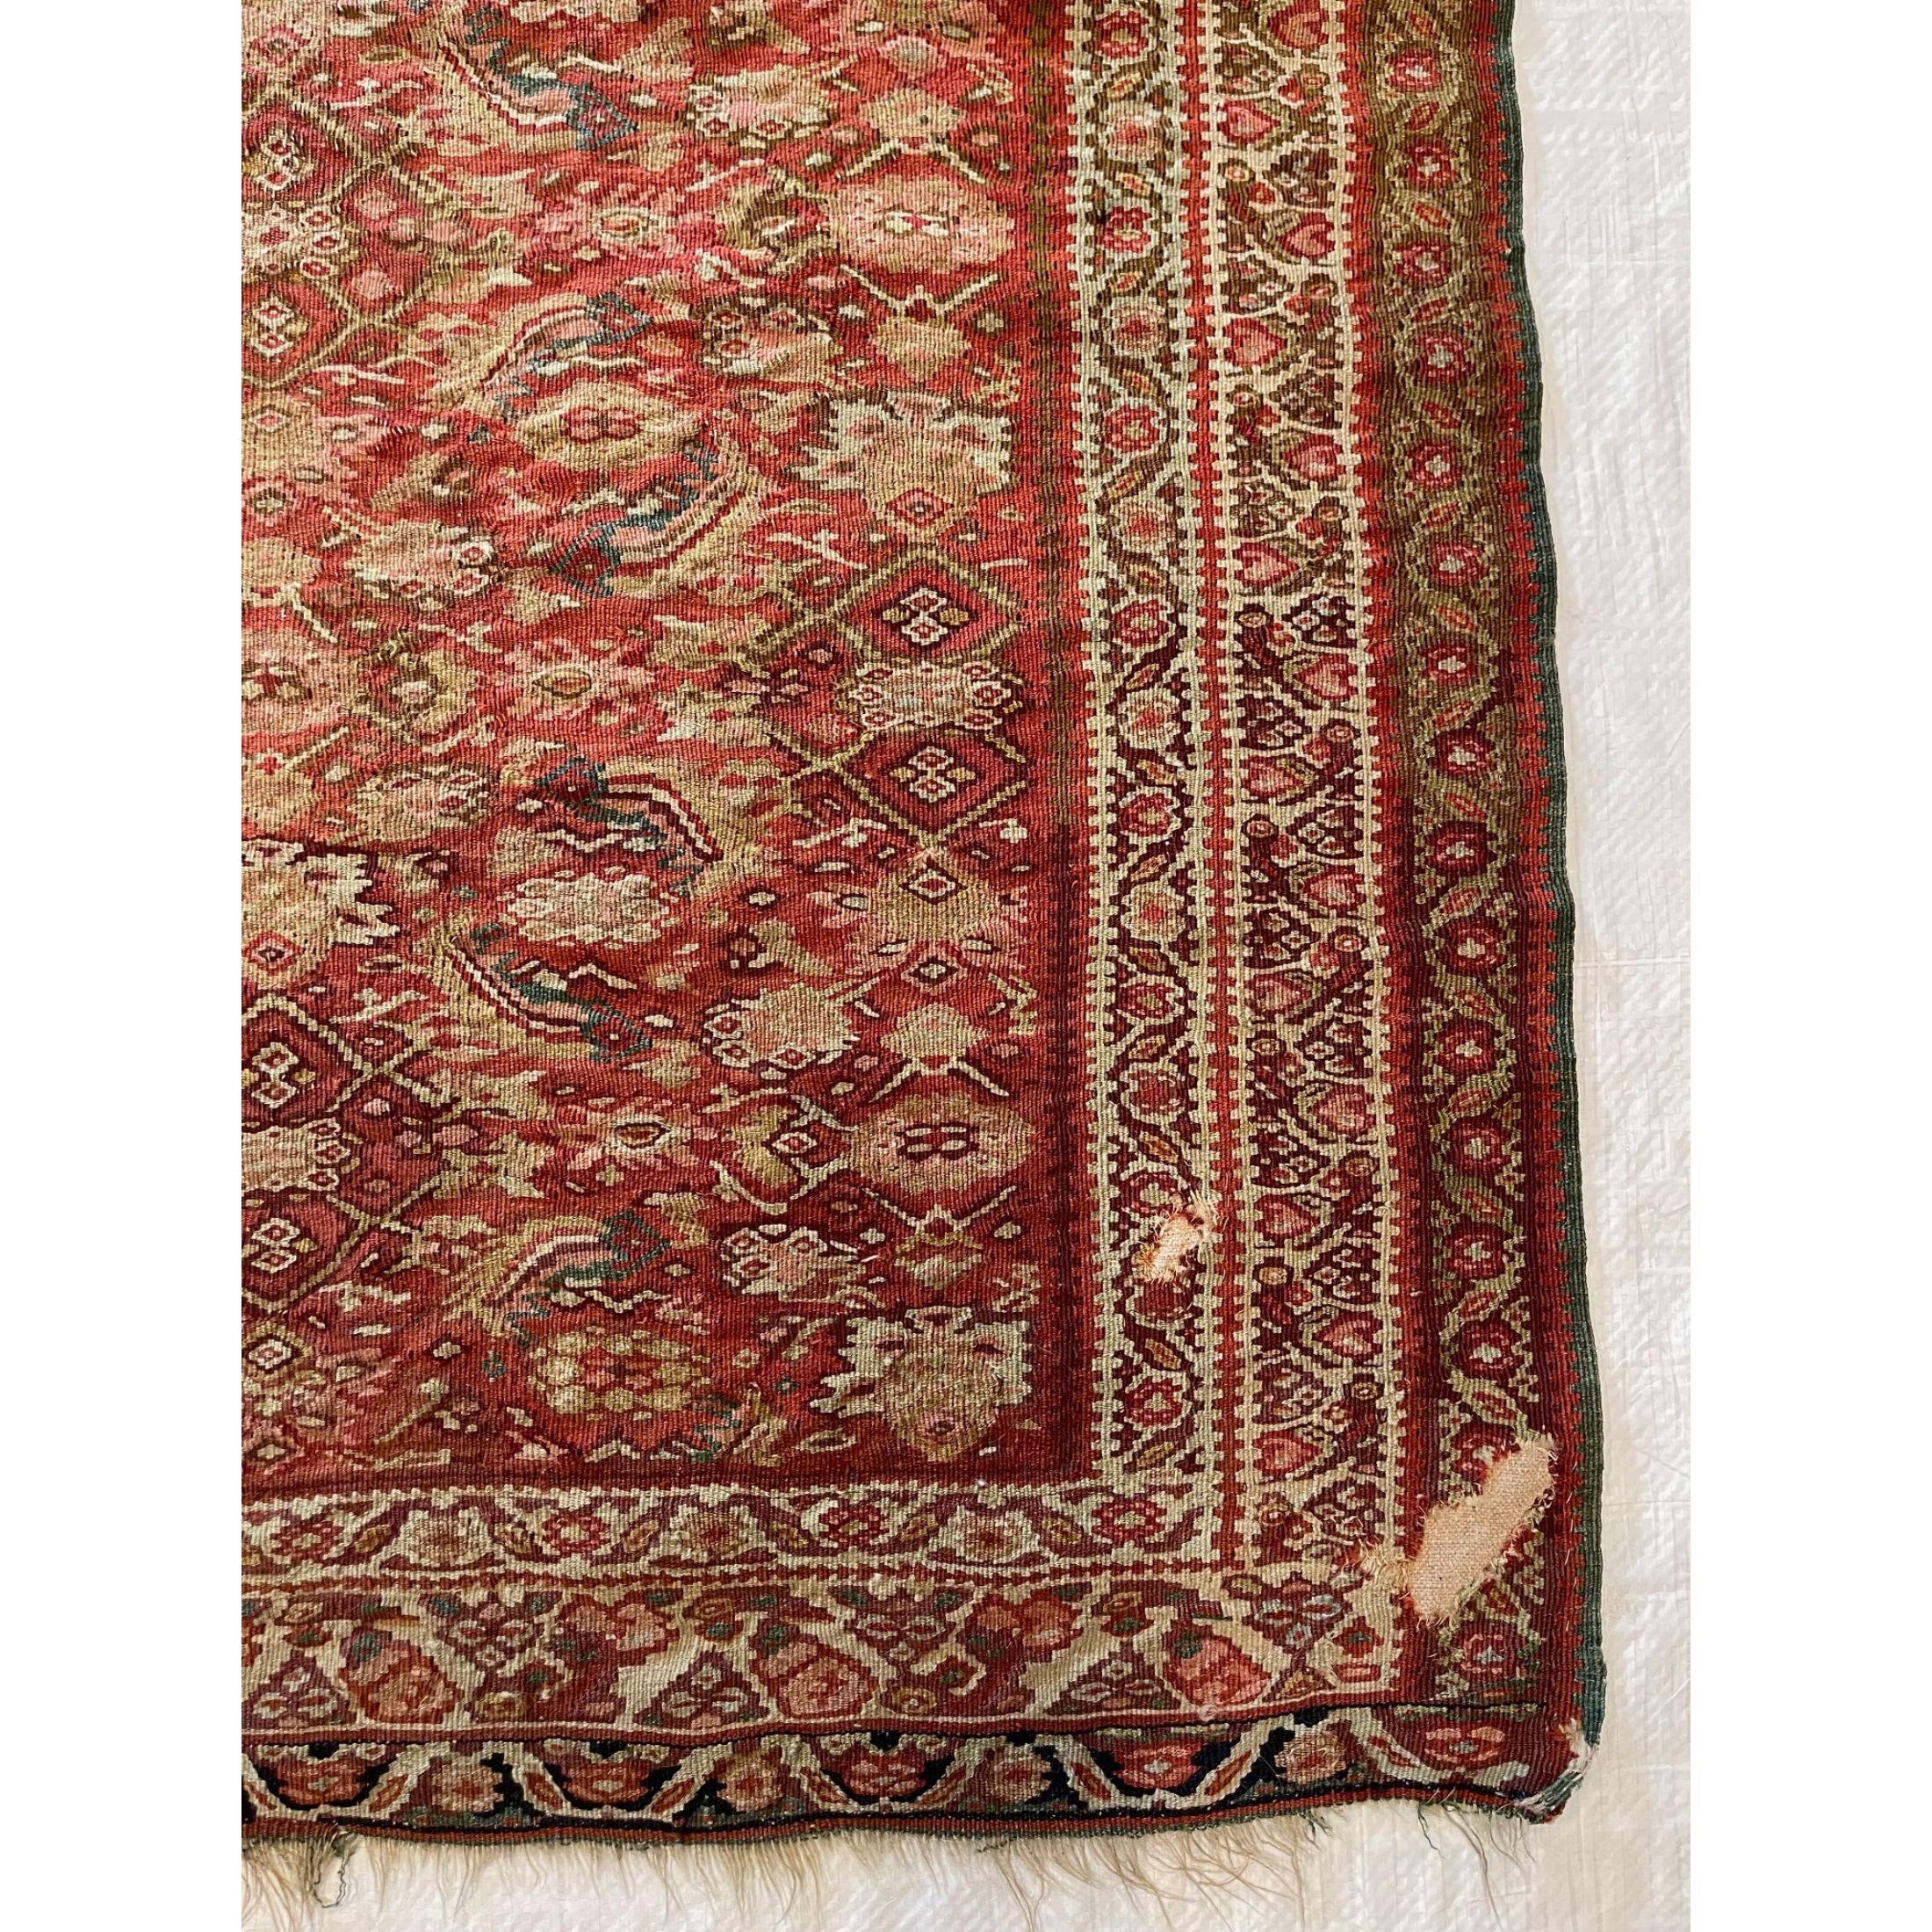 1900 Antique Flat Weave Kilim Rug 6'4'' X 4'6'' In Good Condition For Sale In Los Angeles, US